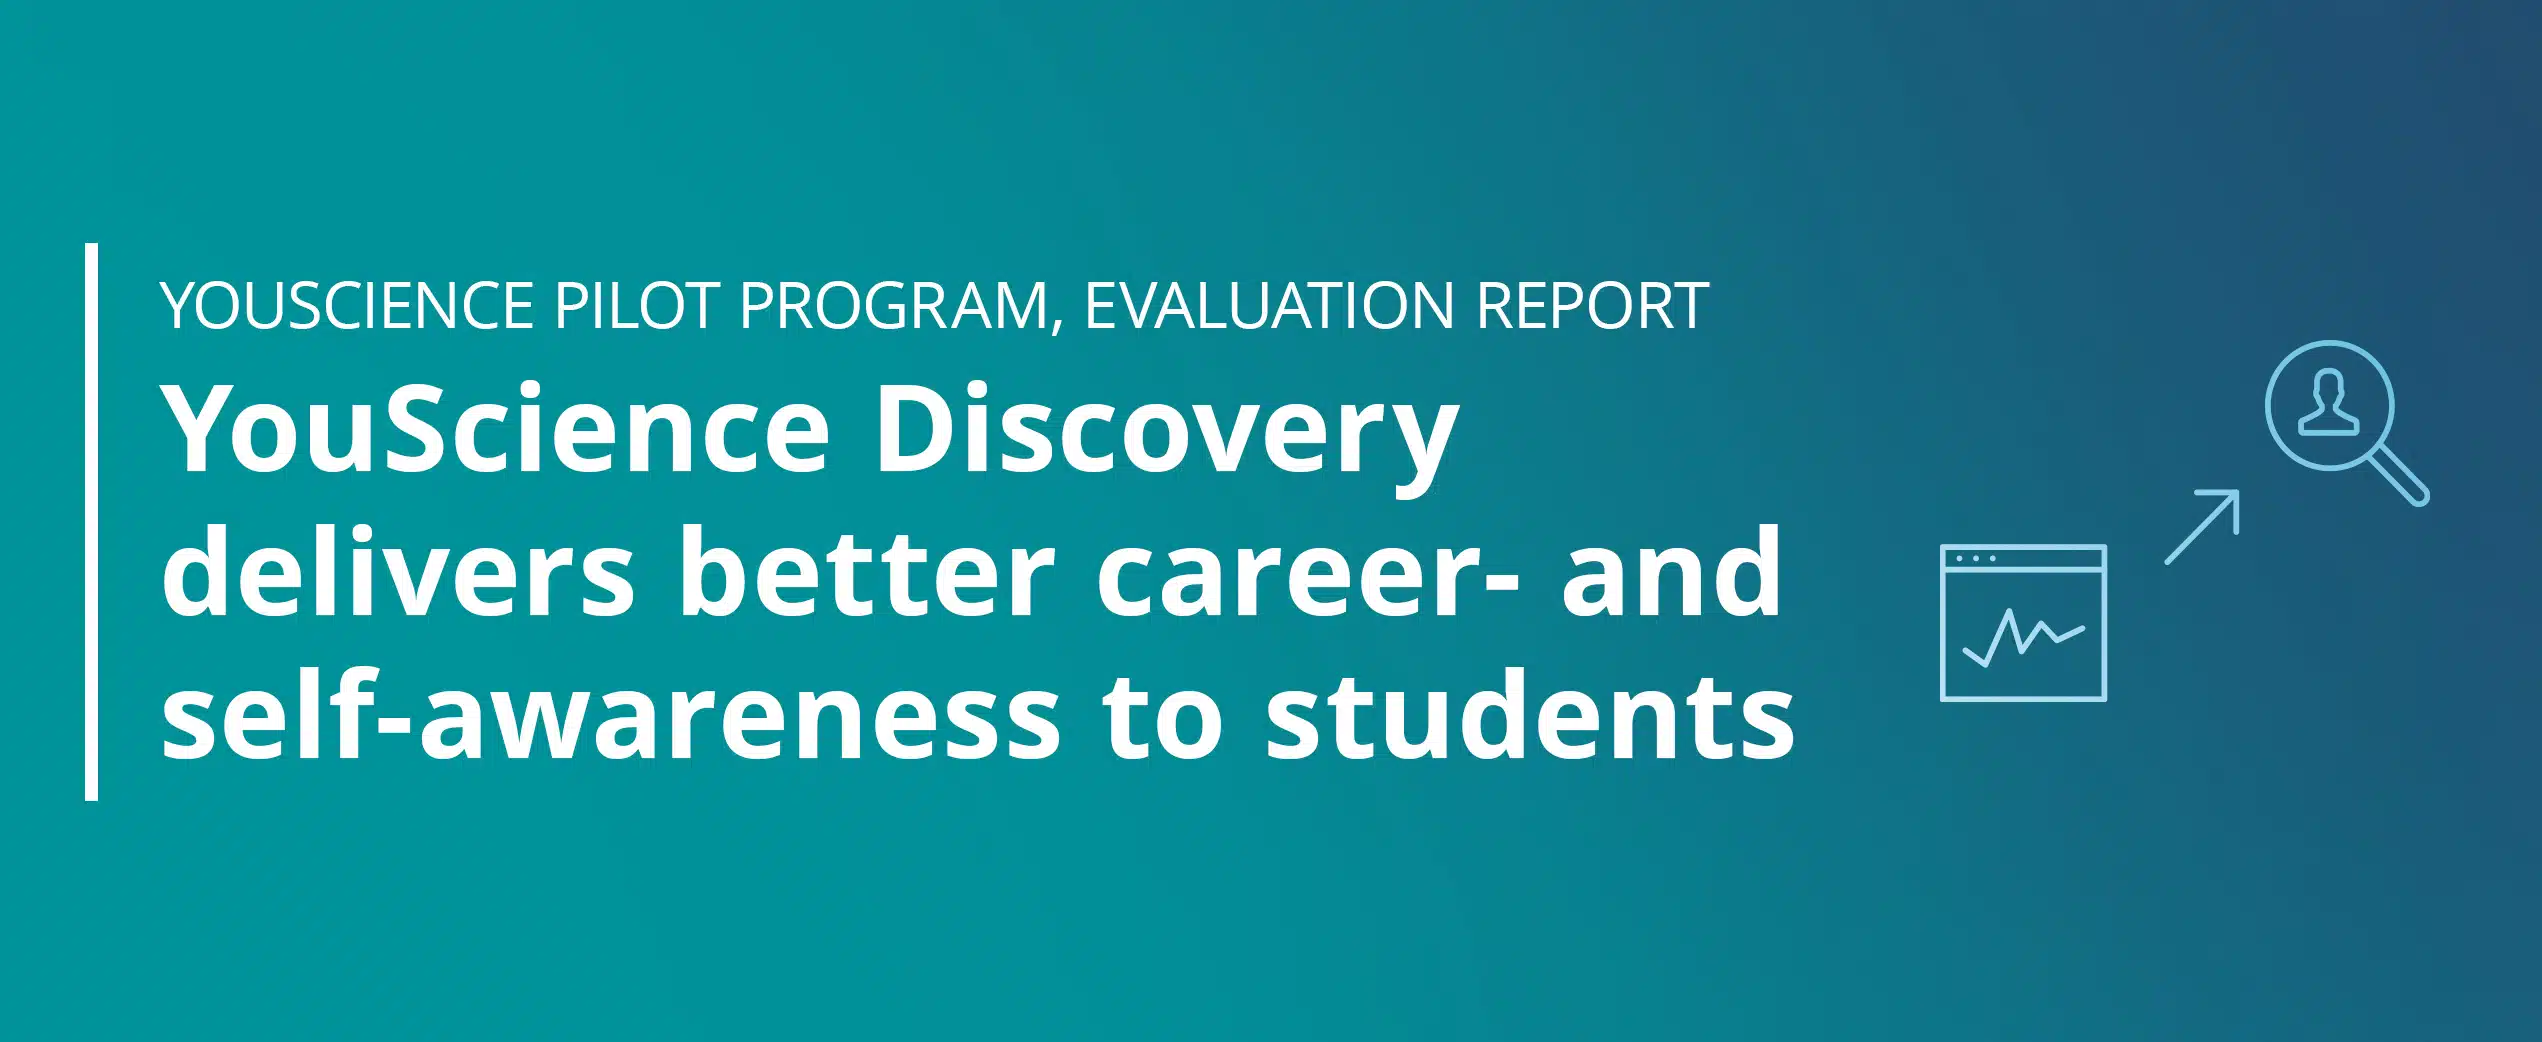 YouScience Discovery delivers better career- and self-awareness to students